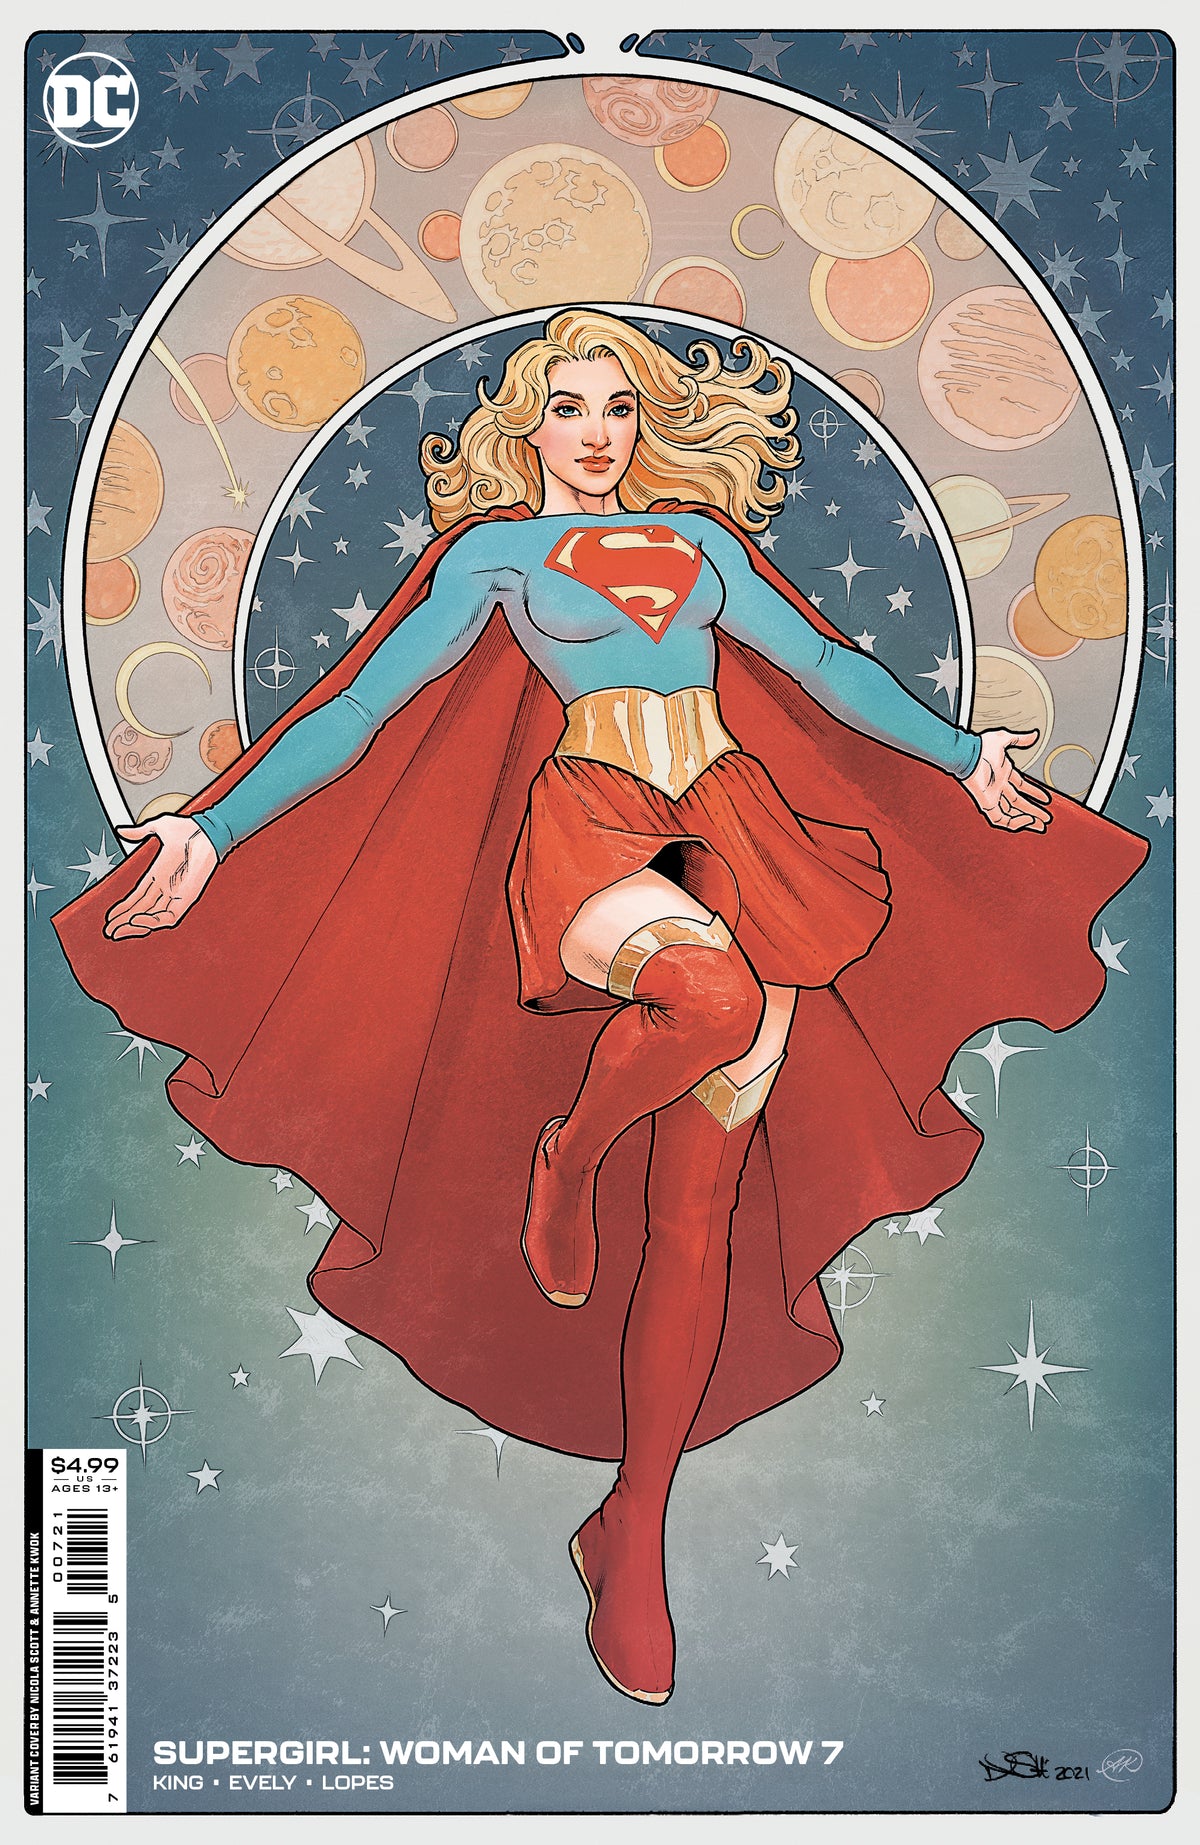 Photo of Supergirl: Woman of Tomorrow (22) 7B  Nicola Scott   Nicola Scott   comic sold by Stronghold Collectibles